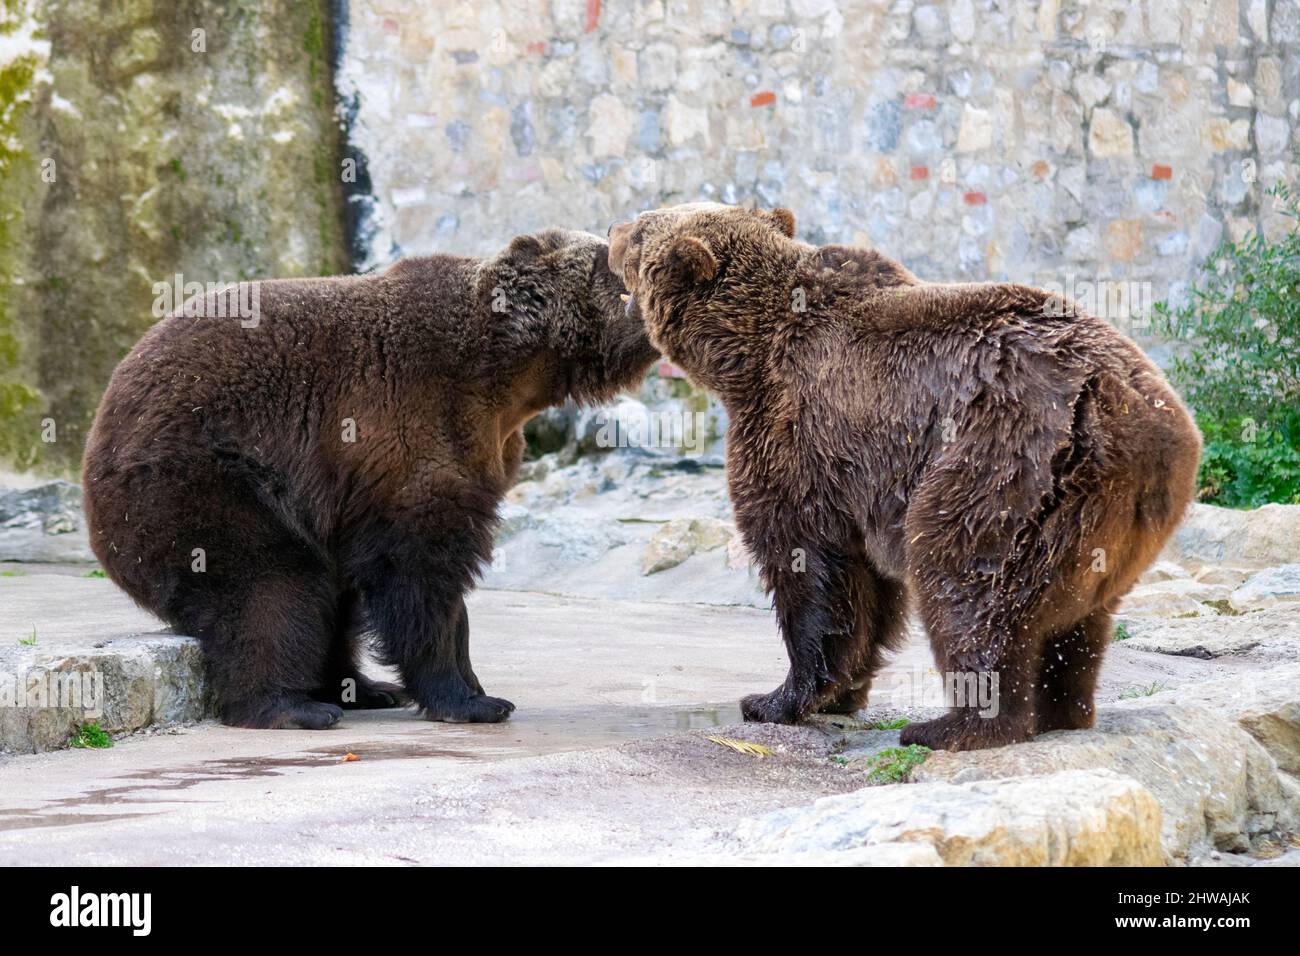 Lisbon zoo, portugal. The grizzly bear (Ursus arctos horribilis), also known as the North American brown bear or simply grizzly. Two bears playing. Stock Photo